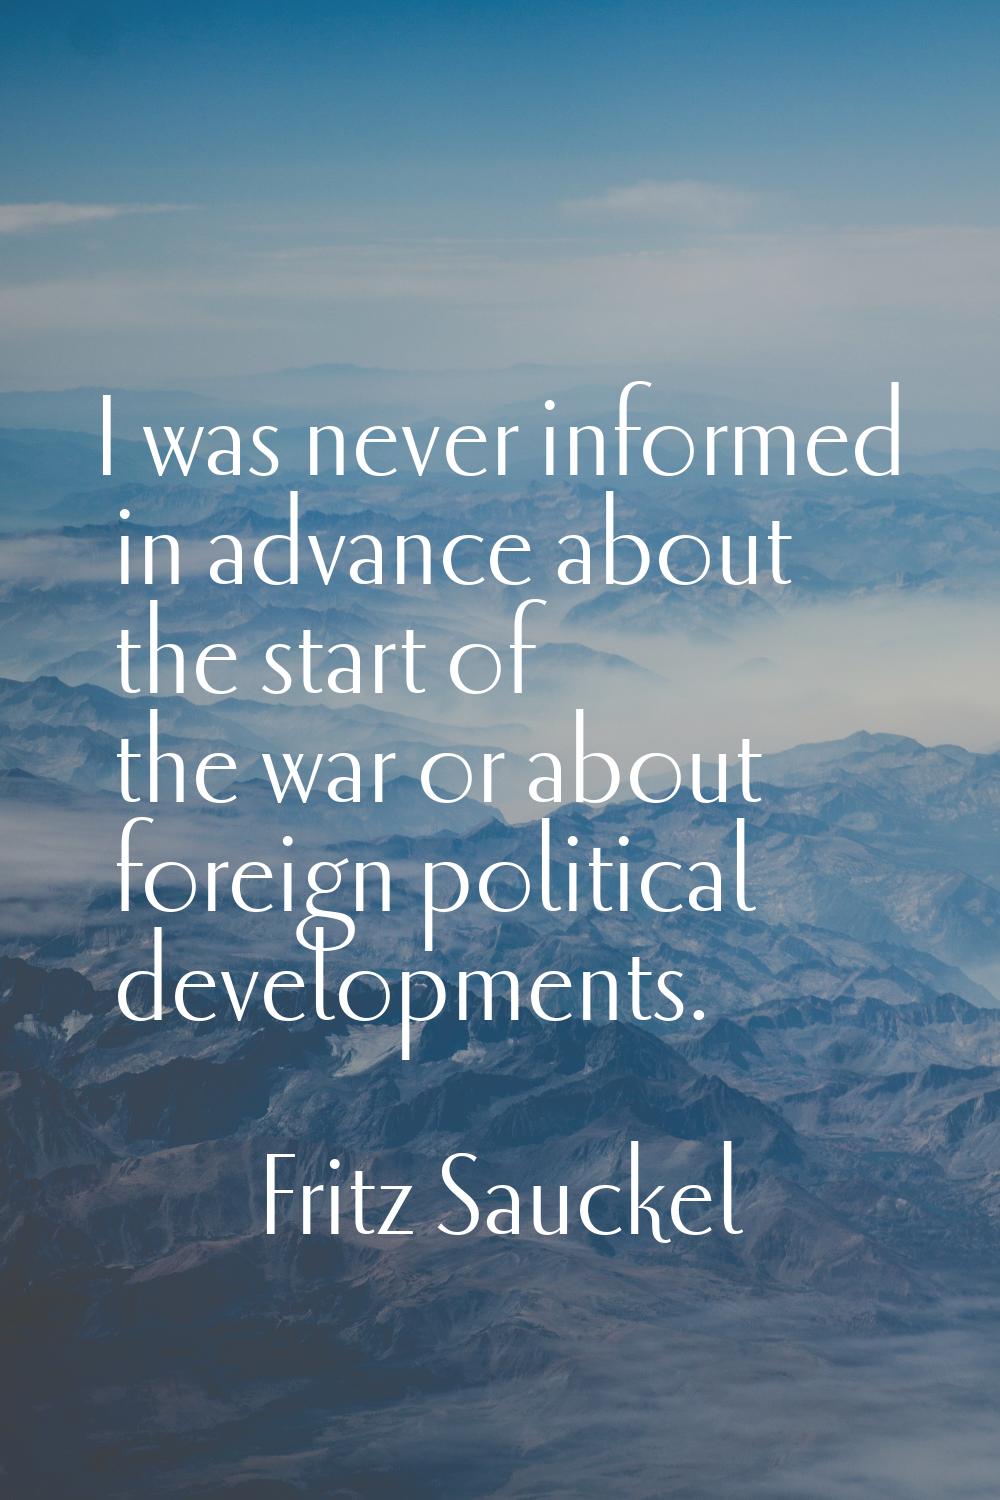 I was never informed in advance about the start of the war or about foreign political developments.